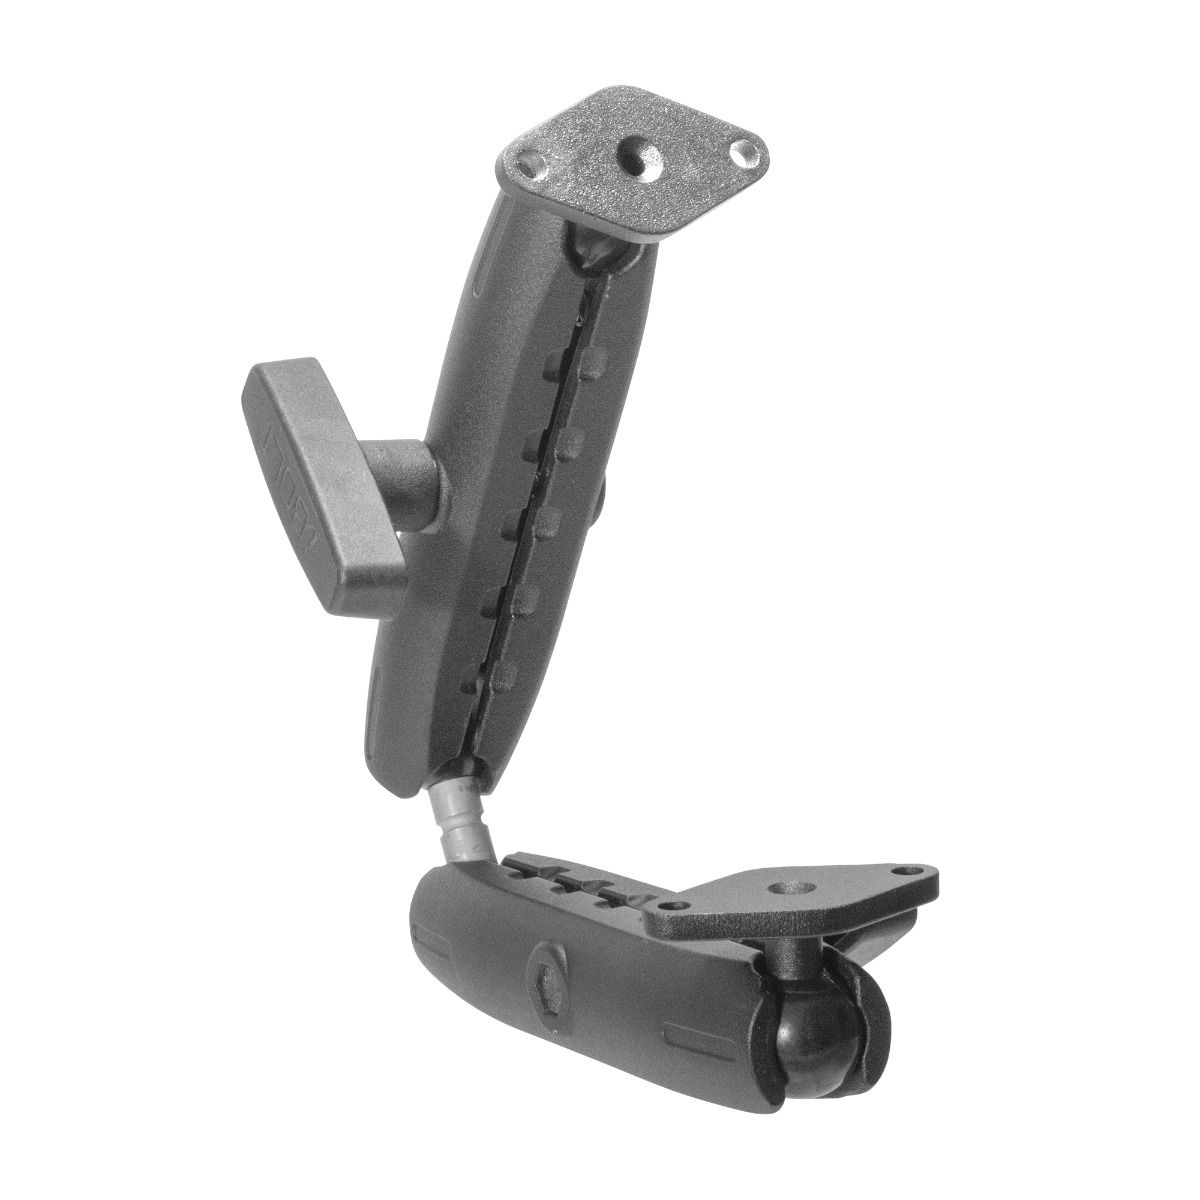 iBOLT Diamond AMPS Plate AccessiBOLT ArmTrack- Great for Wheelchairs, Rehab Chairs, and Mobility Devices with a Track System